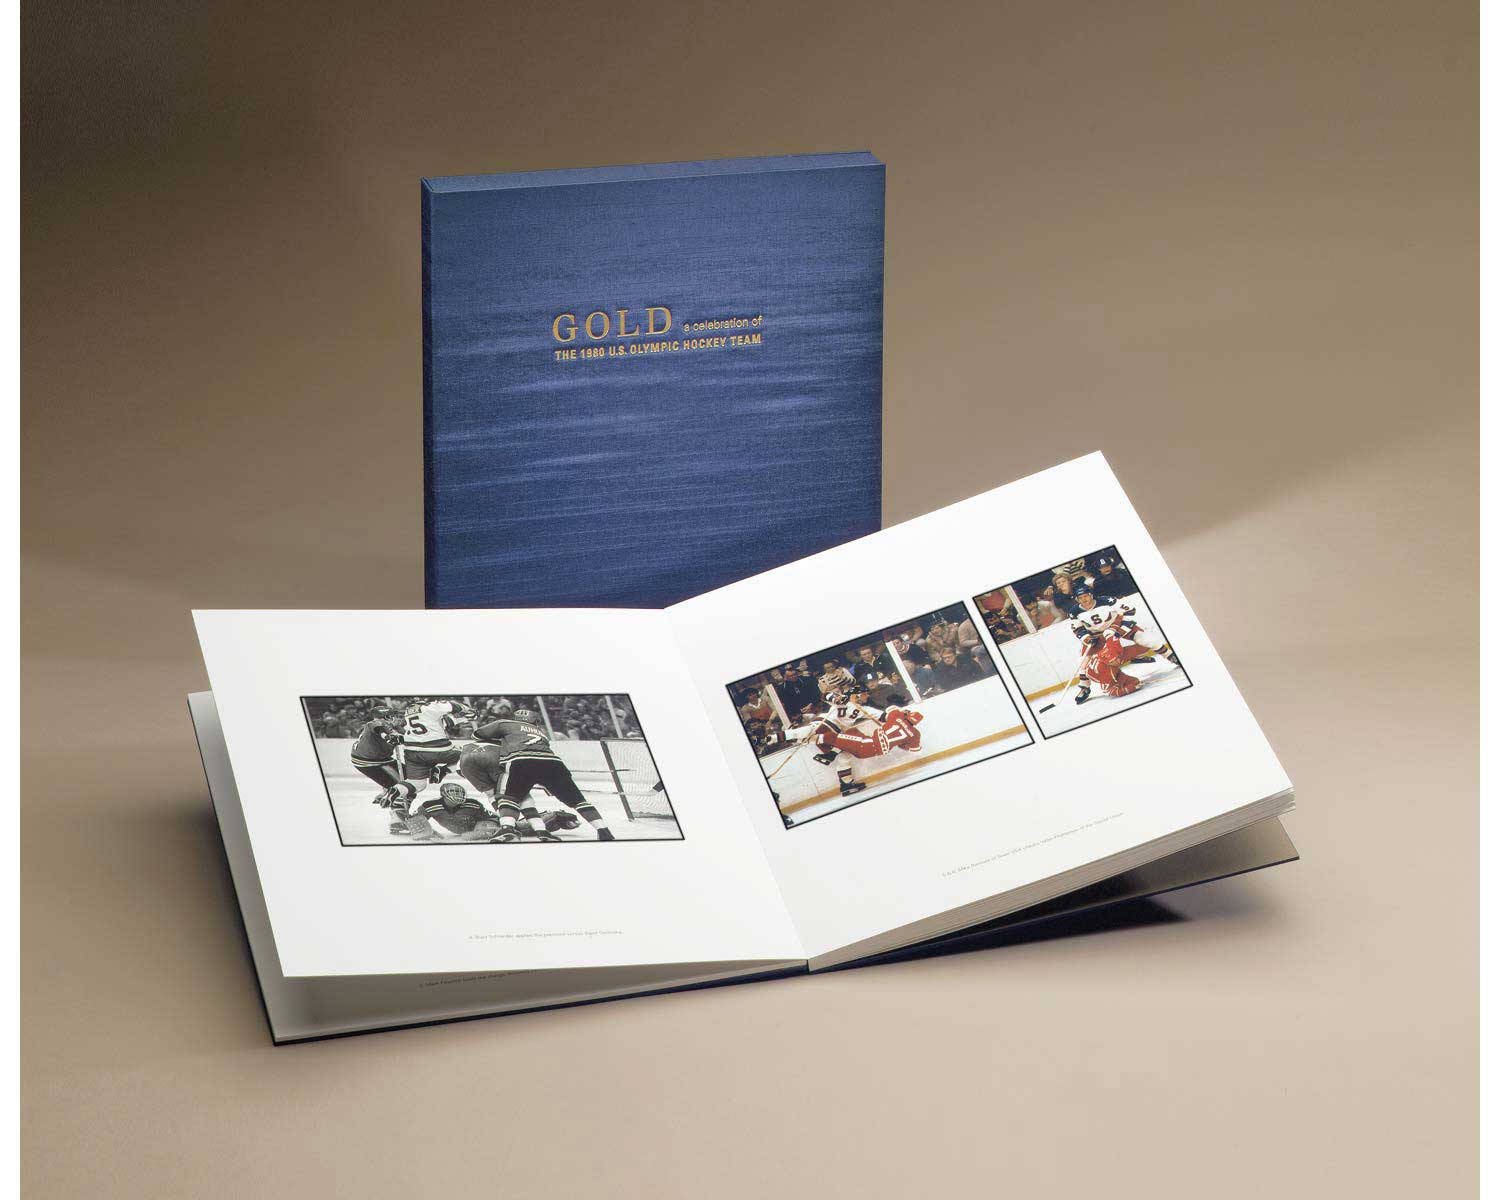 Gold: A Celebration of the 1980 US Olympic Hockey Team